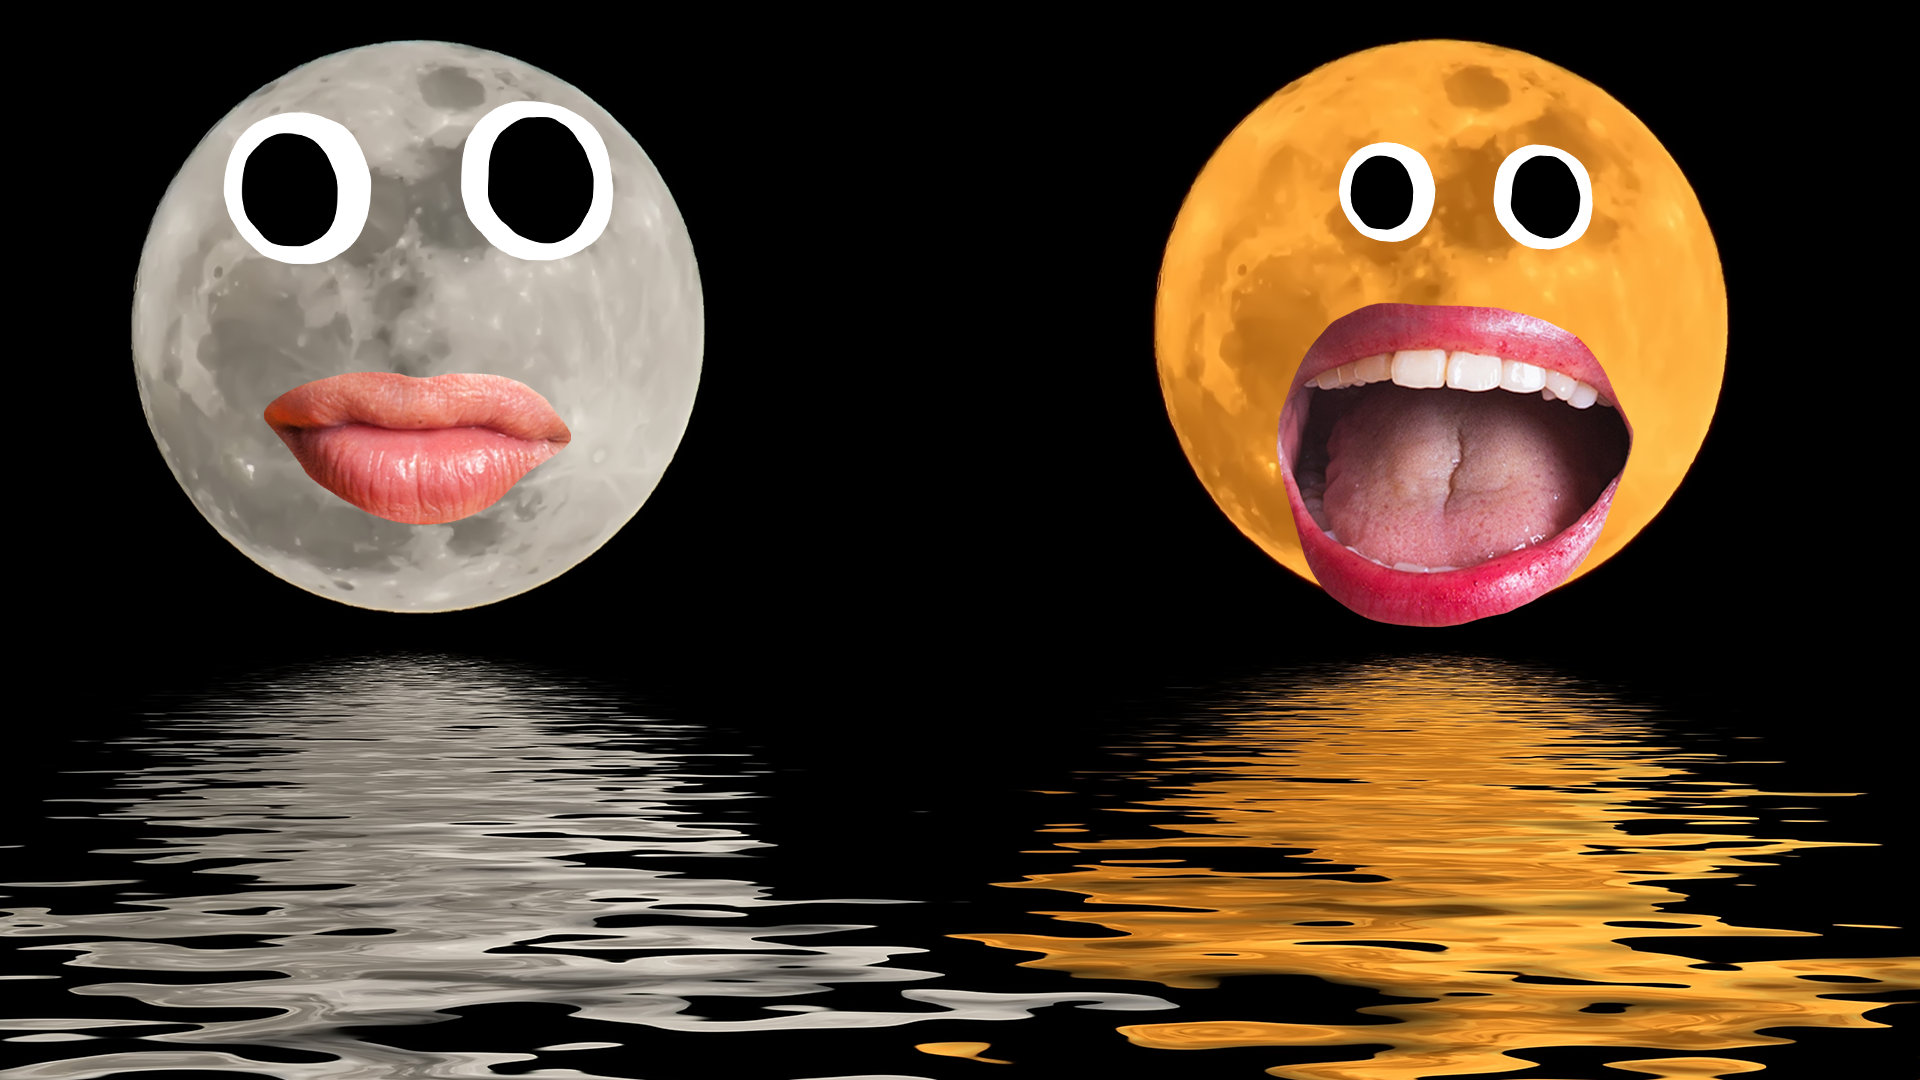 Two moons with silly faces